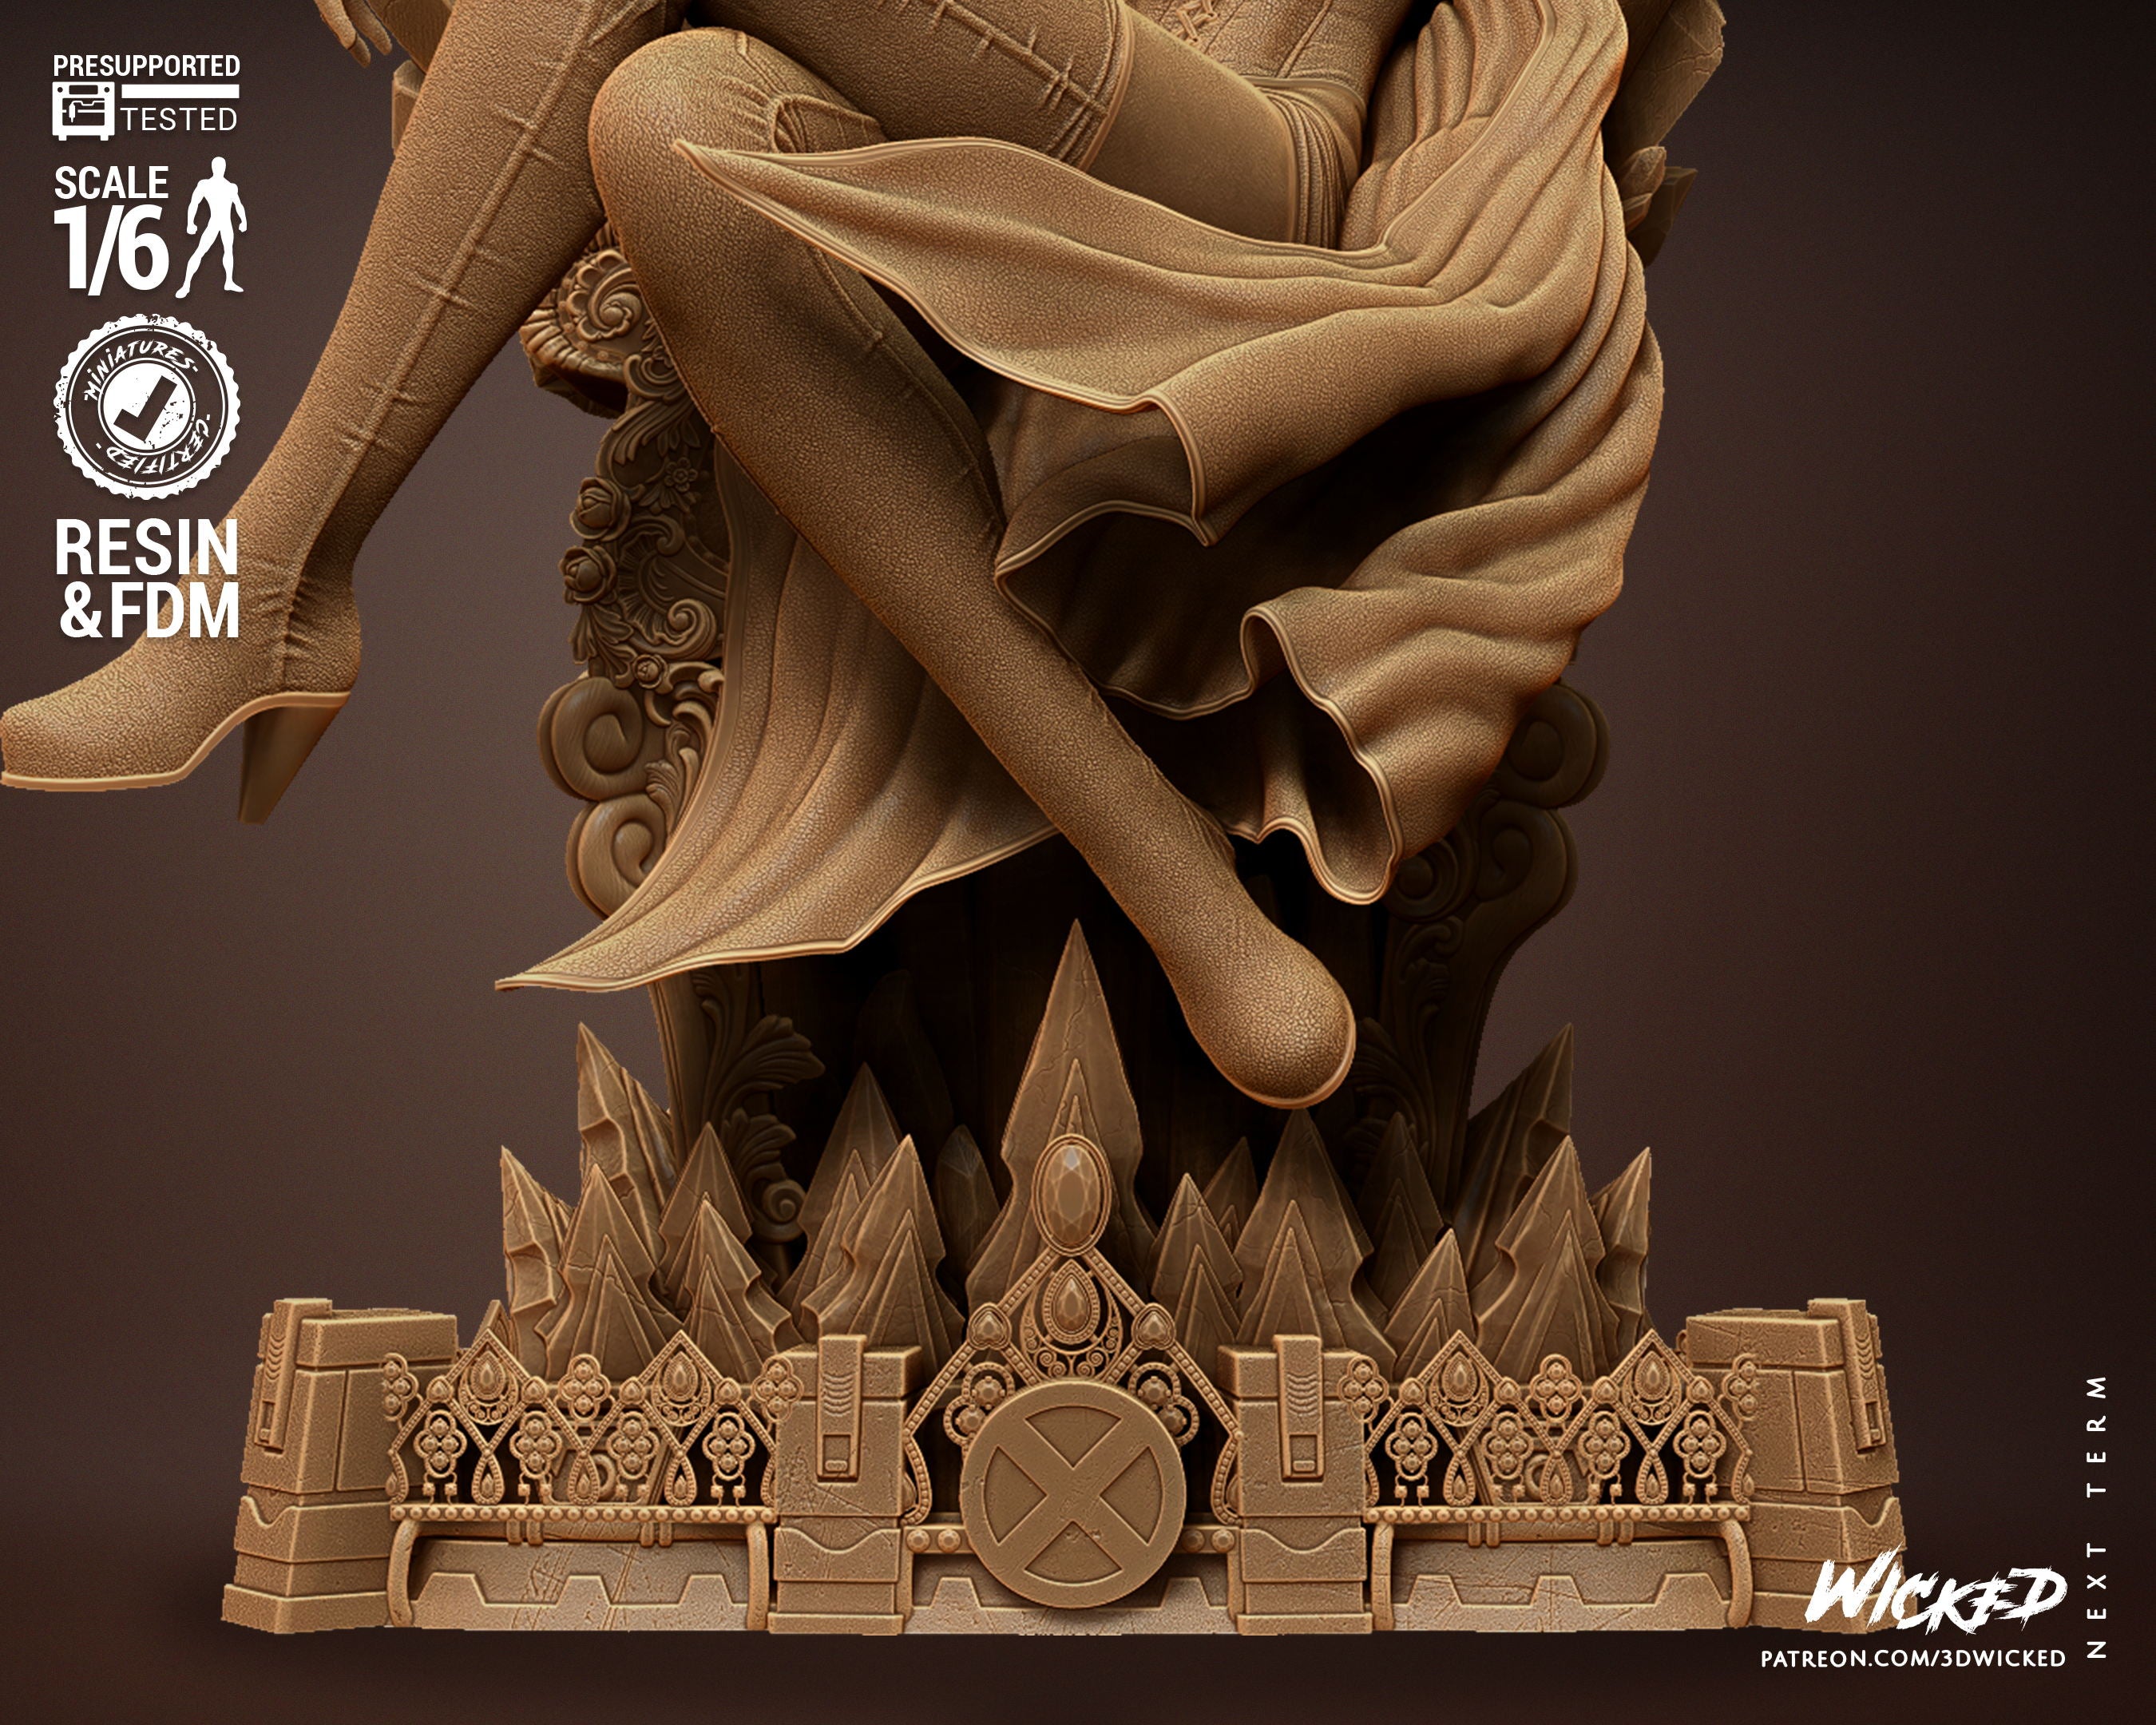 Emma Frost Snow Queen Statue - 6 or 12 scale (420mm or 210mm) 3D Printed Fan Art